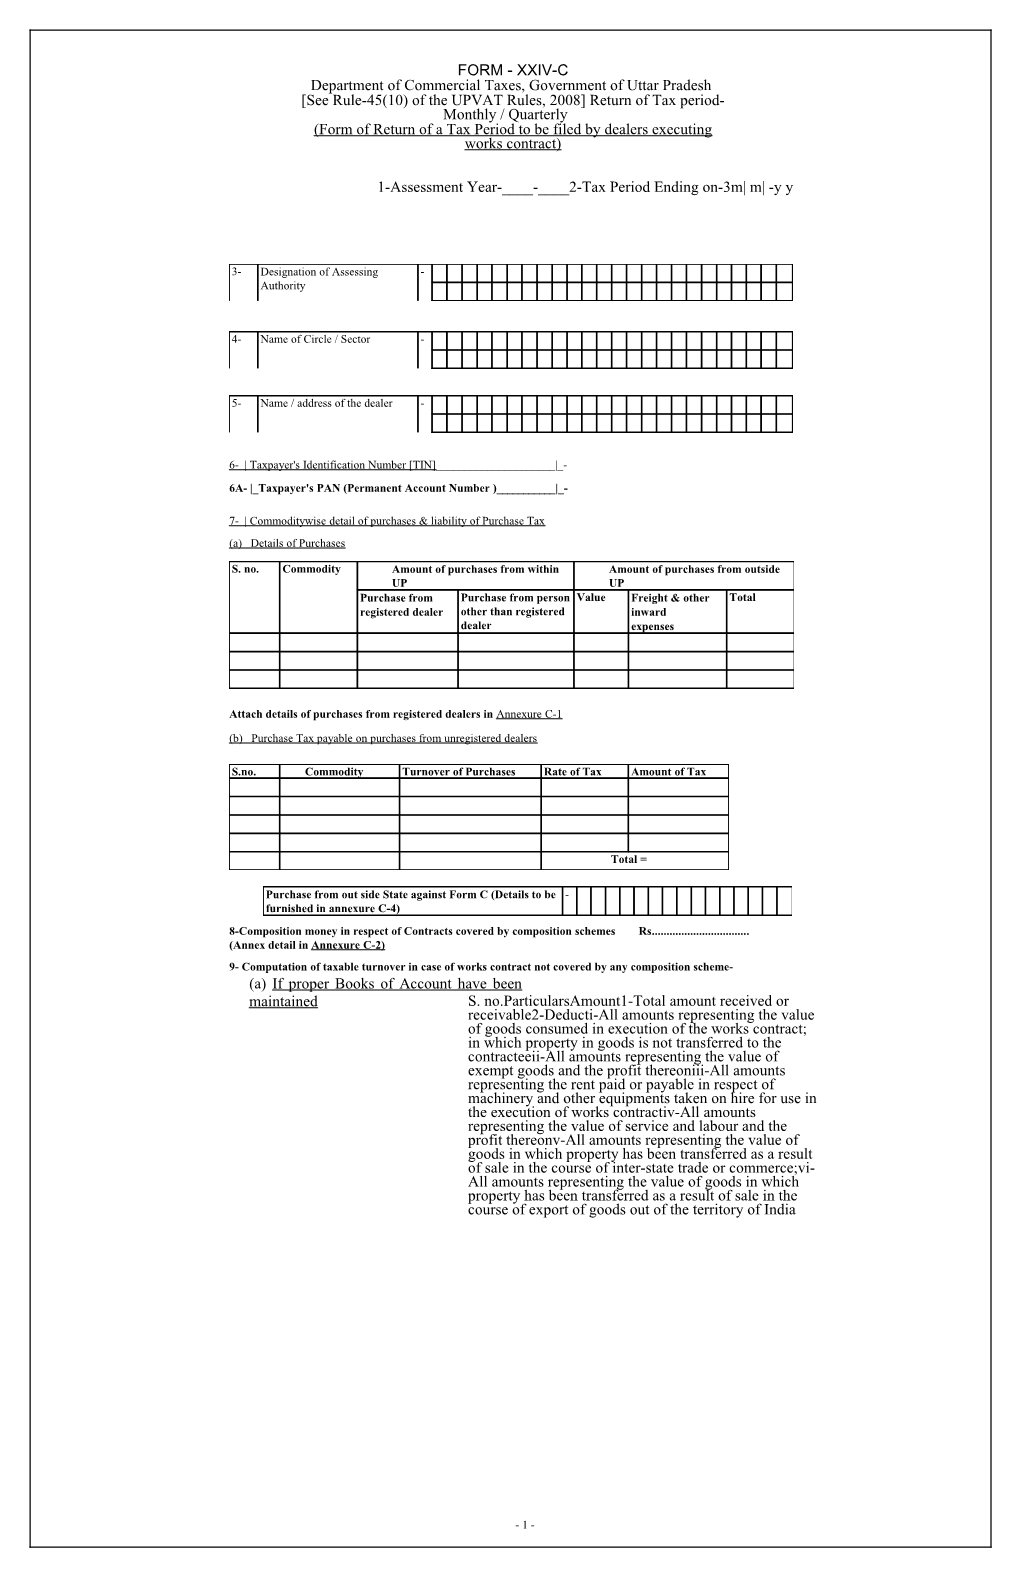 Form-24C for Annexure